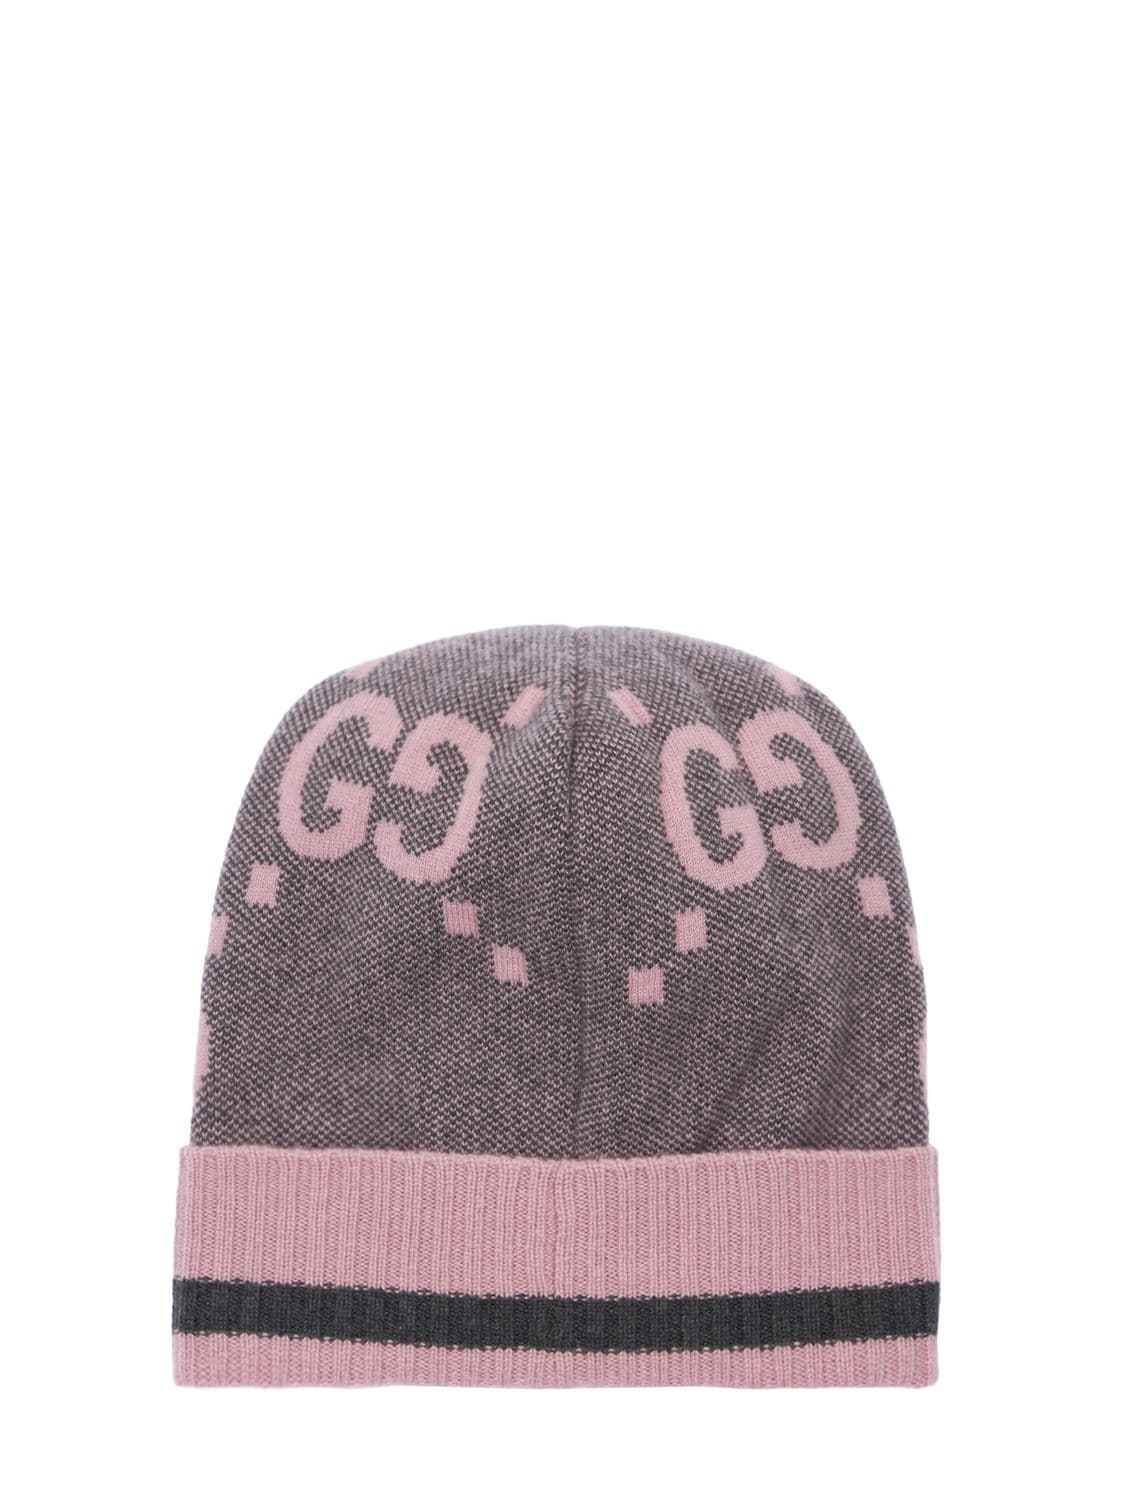 Shop Gucci Gg Motif Cashmere Knit Hat In Pink,grey